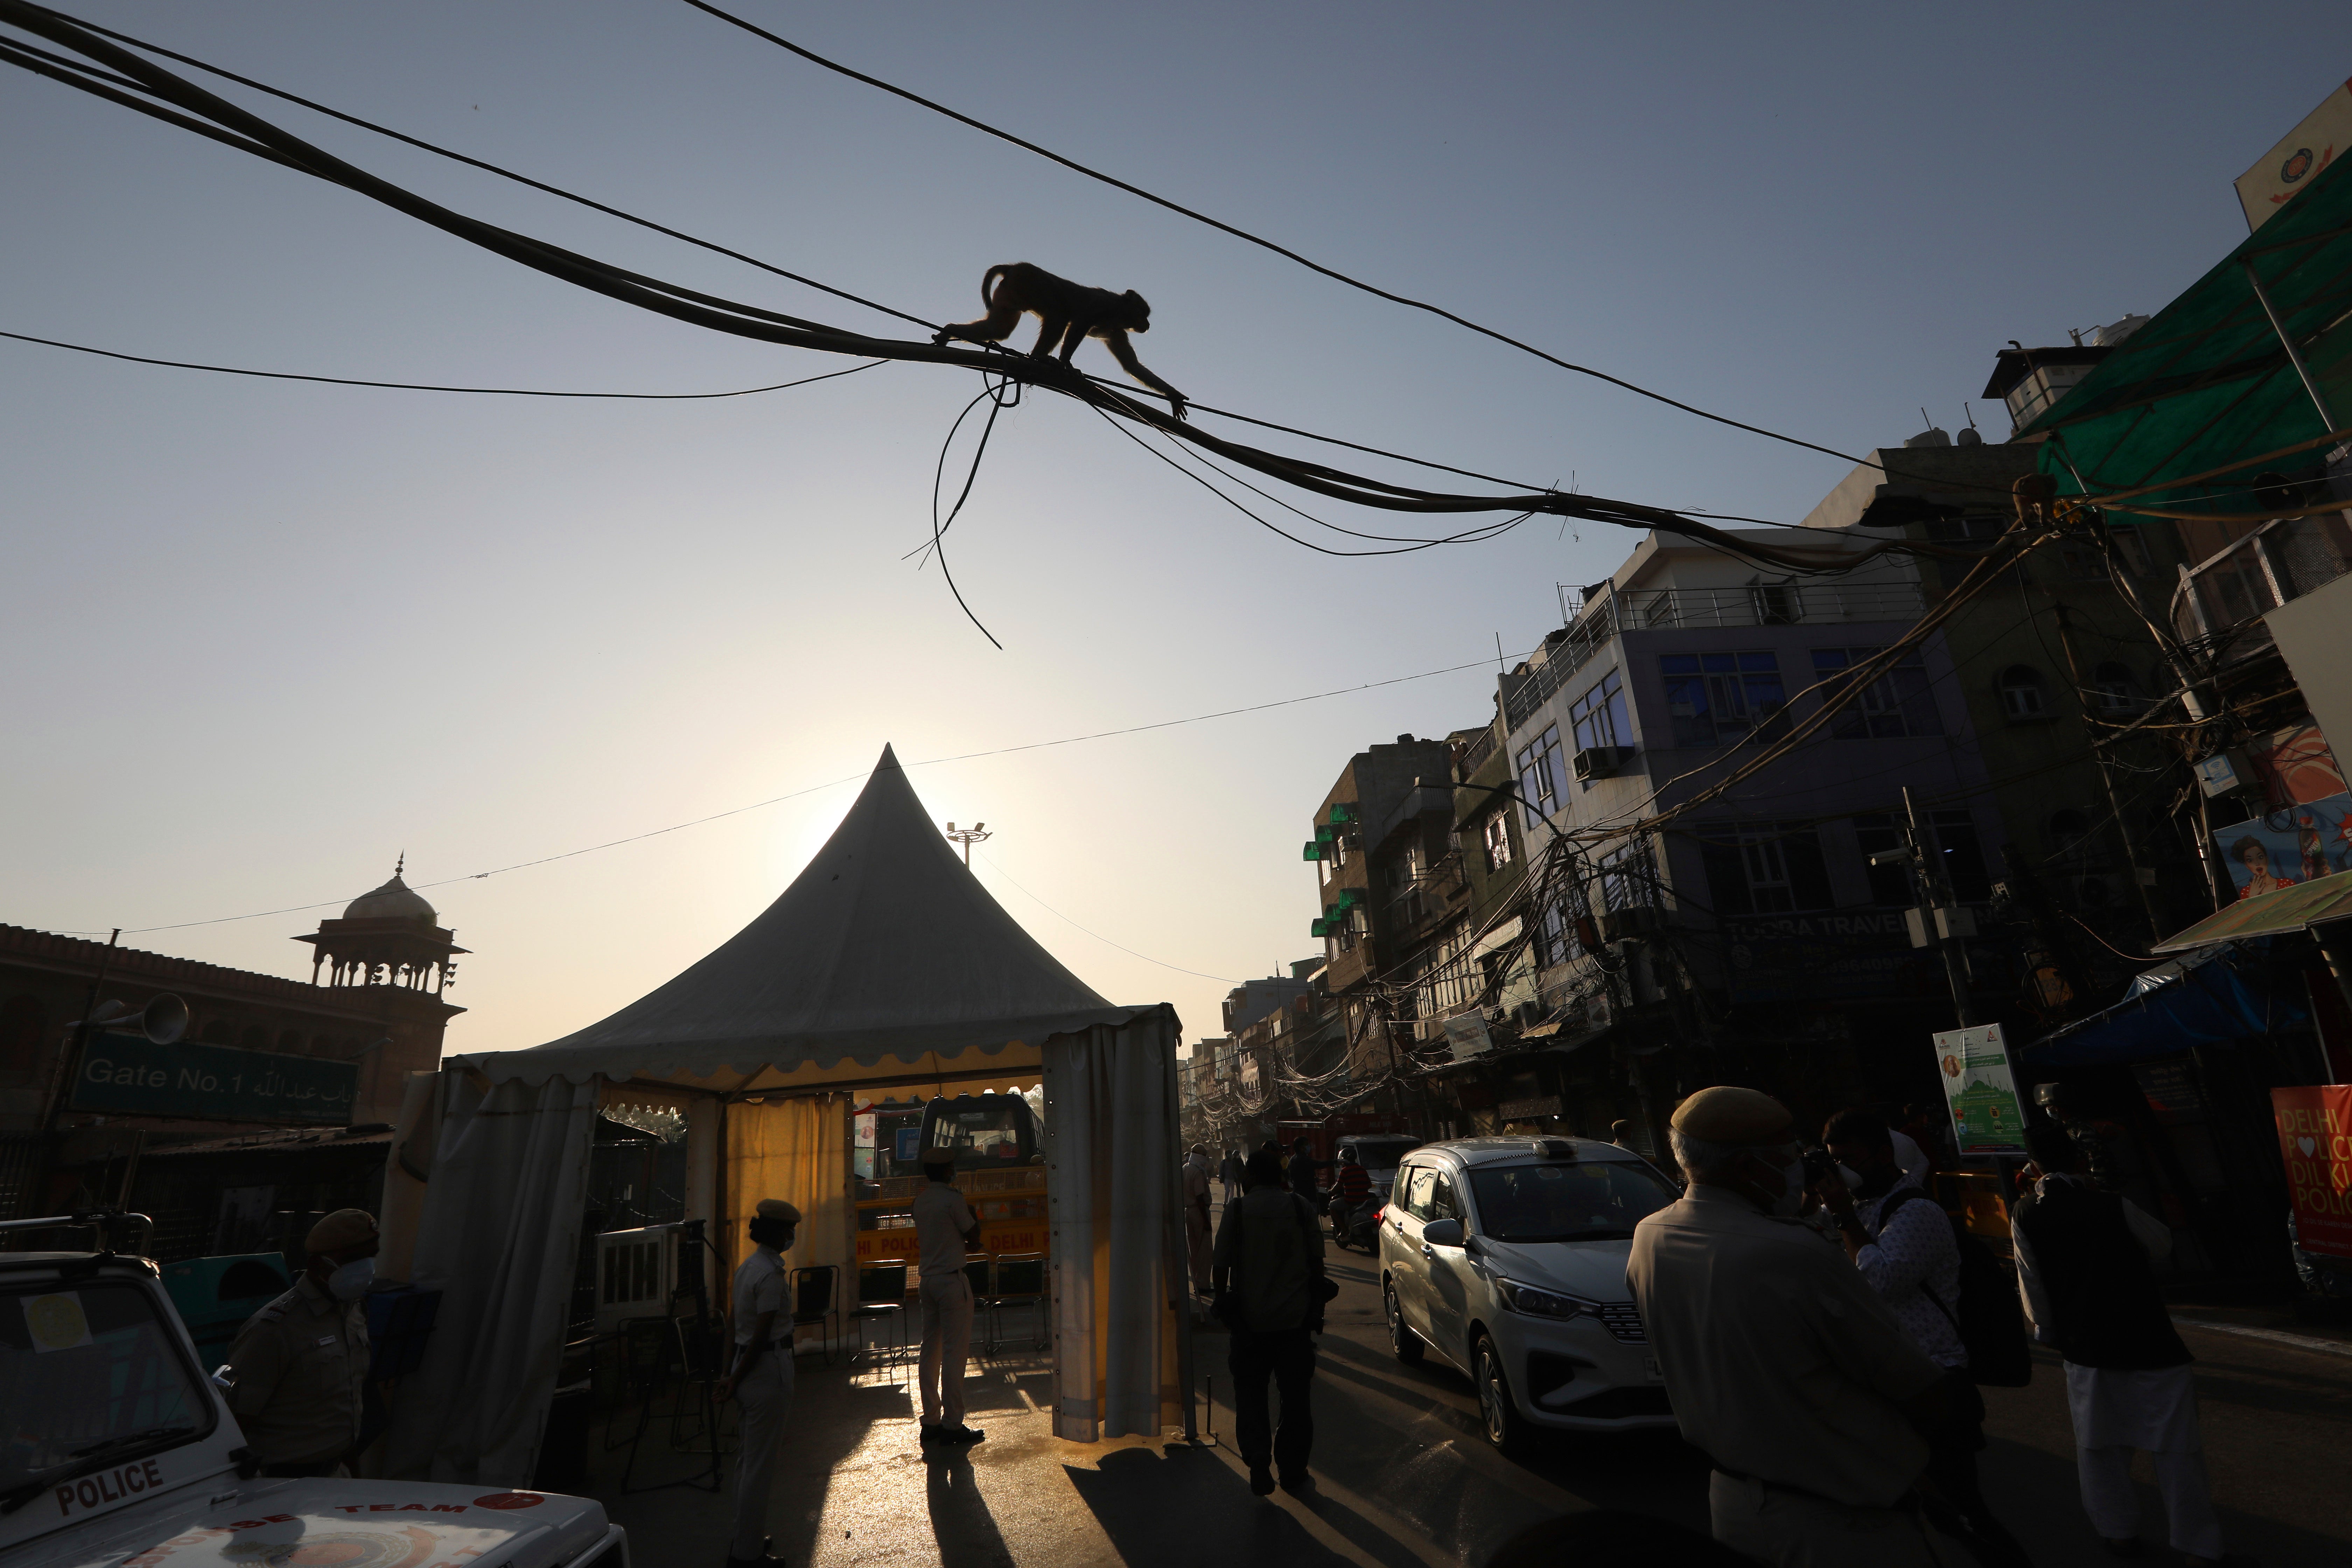 A monkey walks across power cables near the Jama Mosque in the old quarters of New Delhi, India